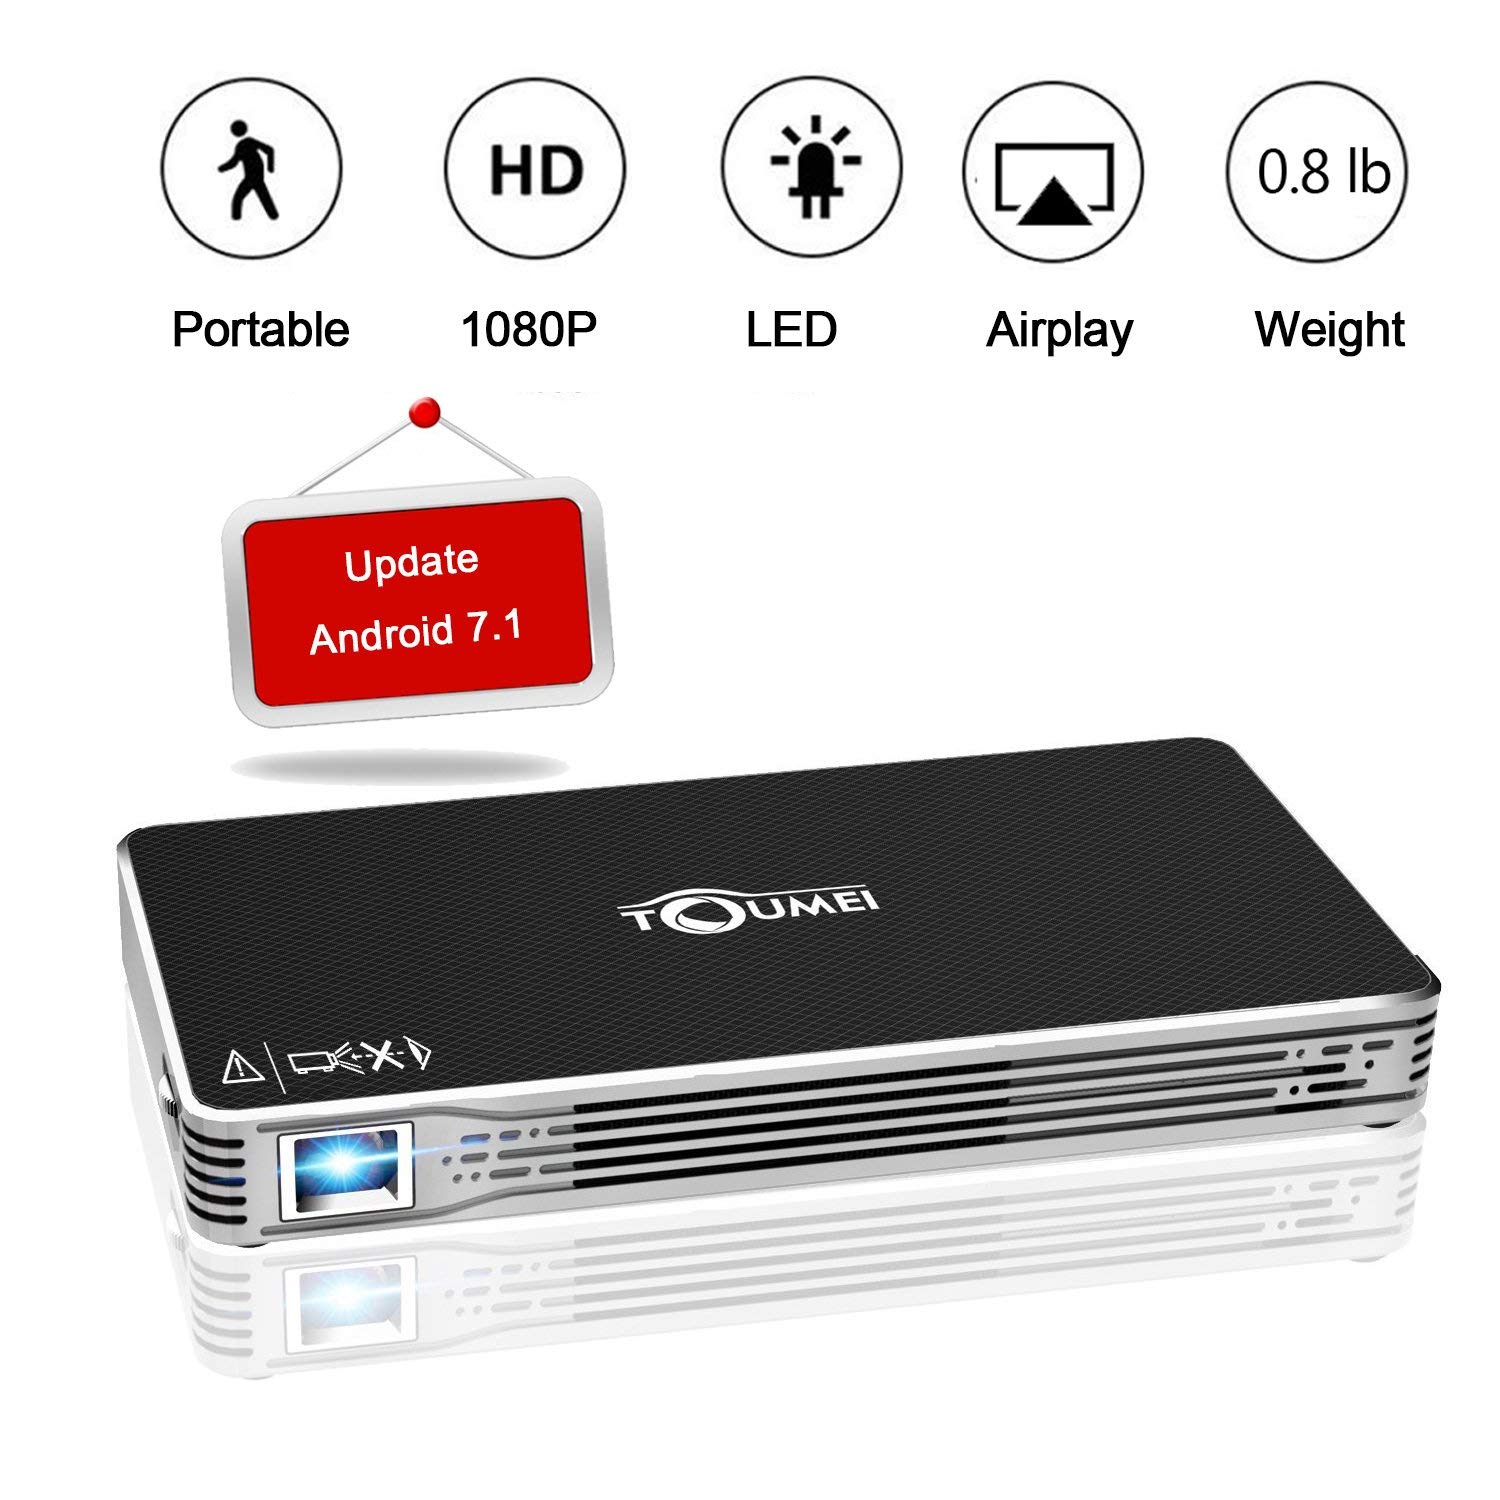 portable 1080p, led, airplay weight - toumei video projector